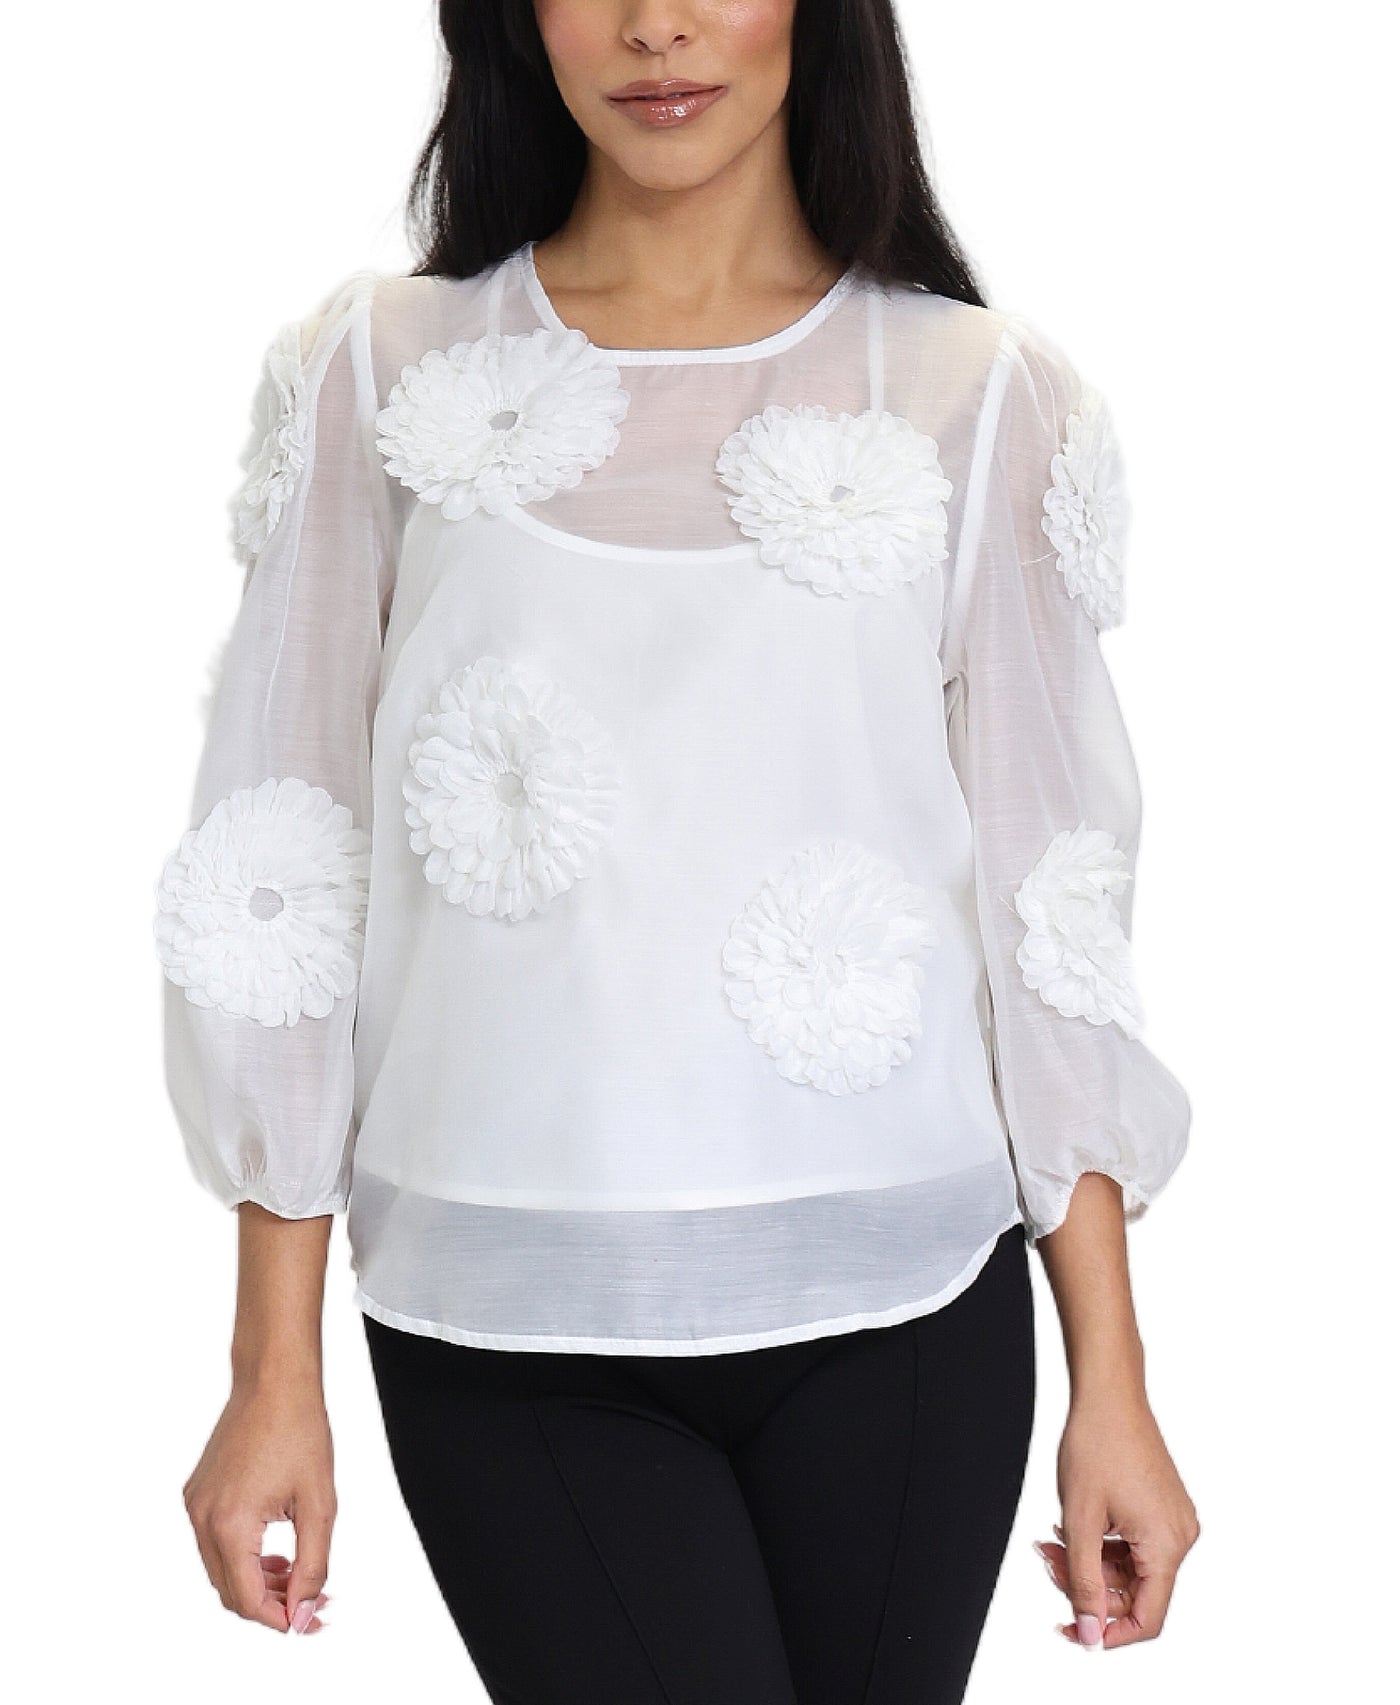 Blouse w/ Dimensional Flowers image 1